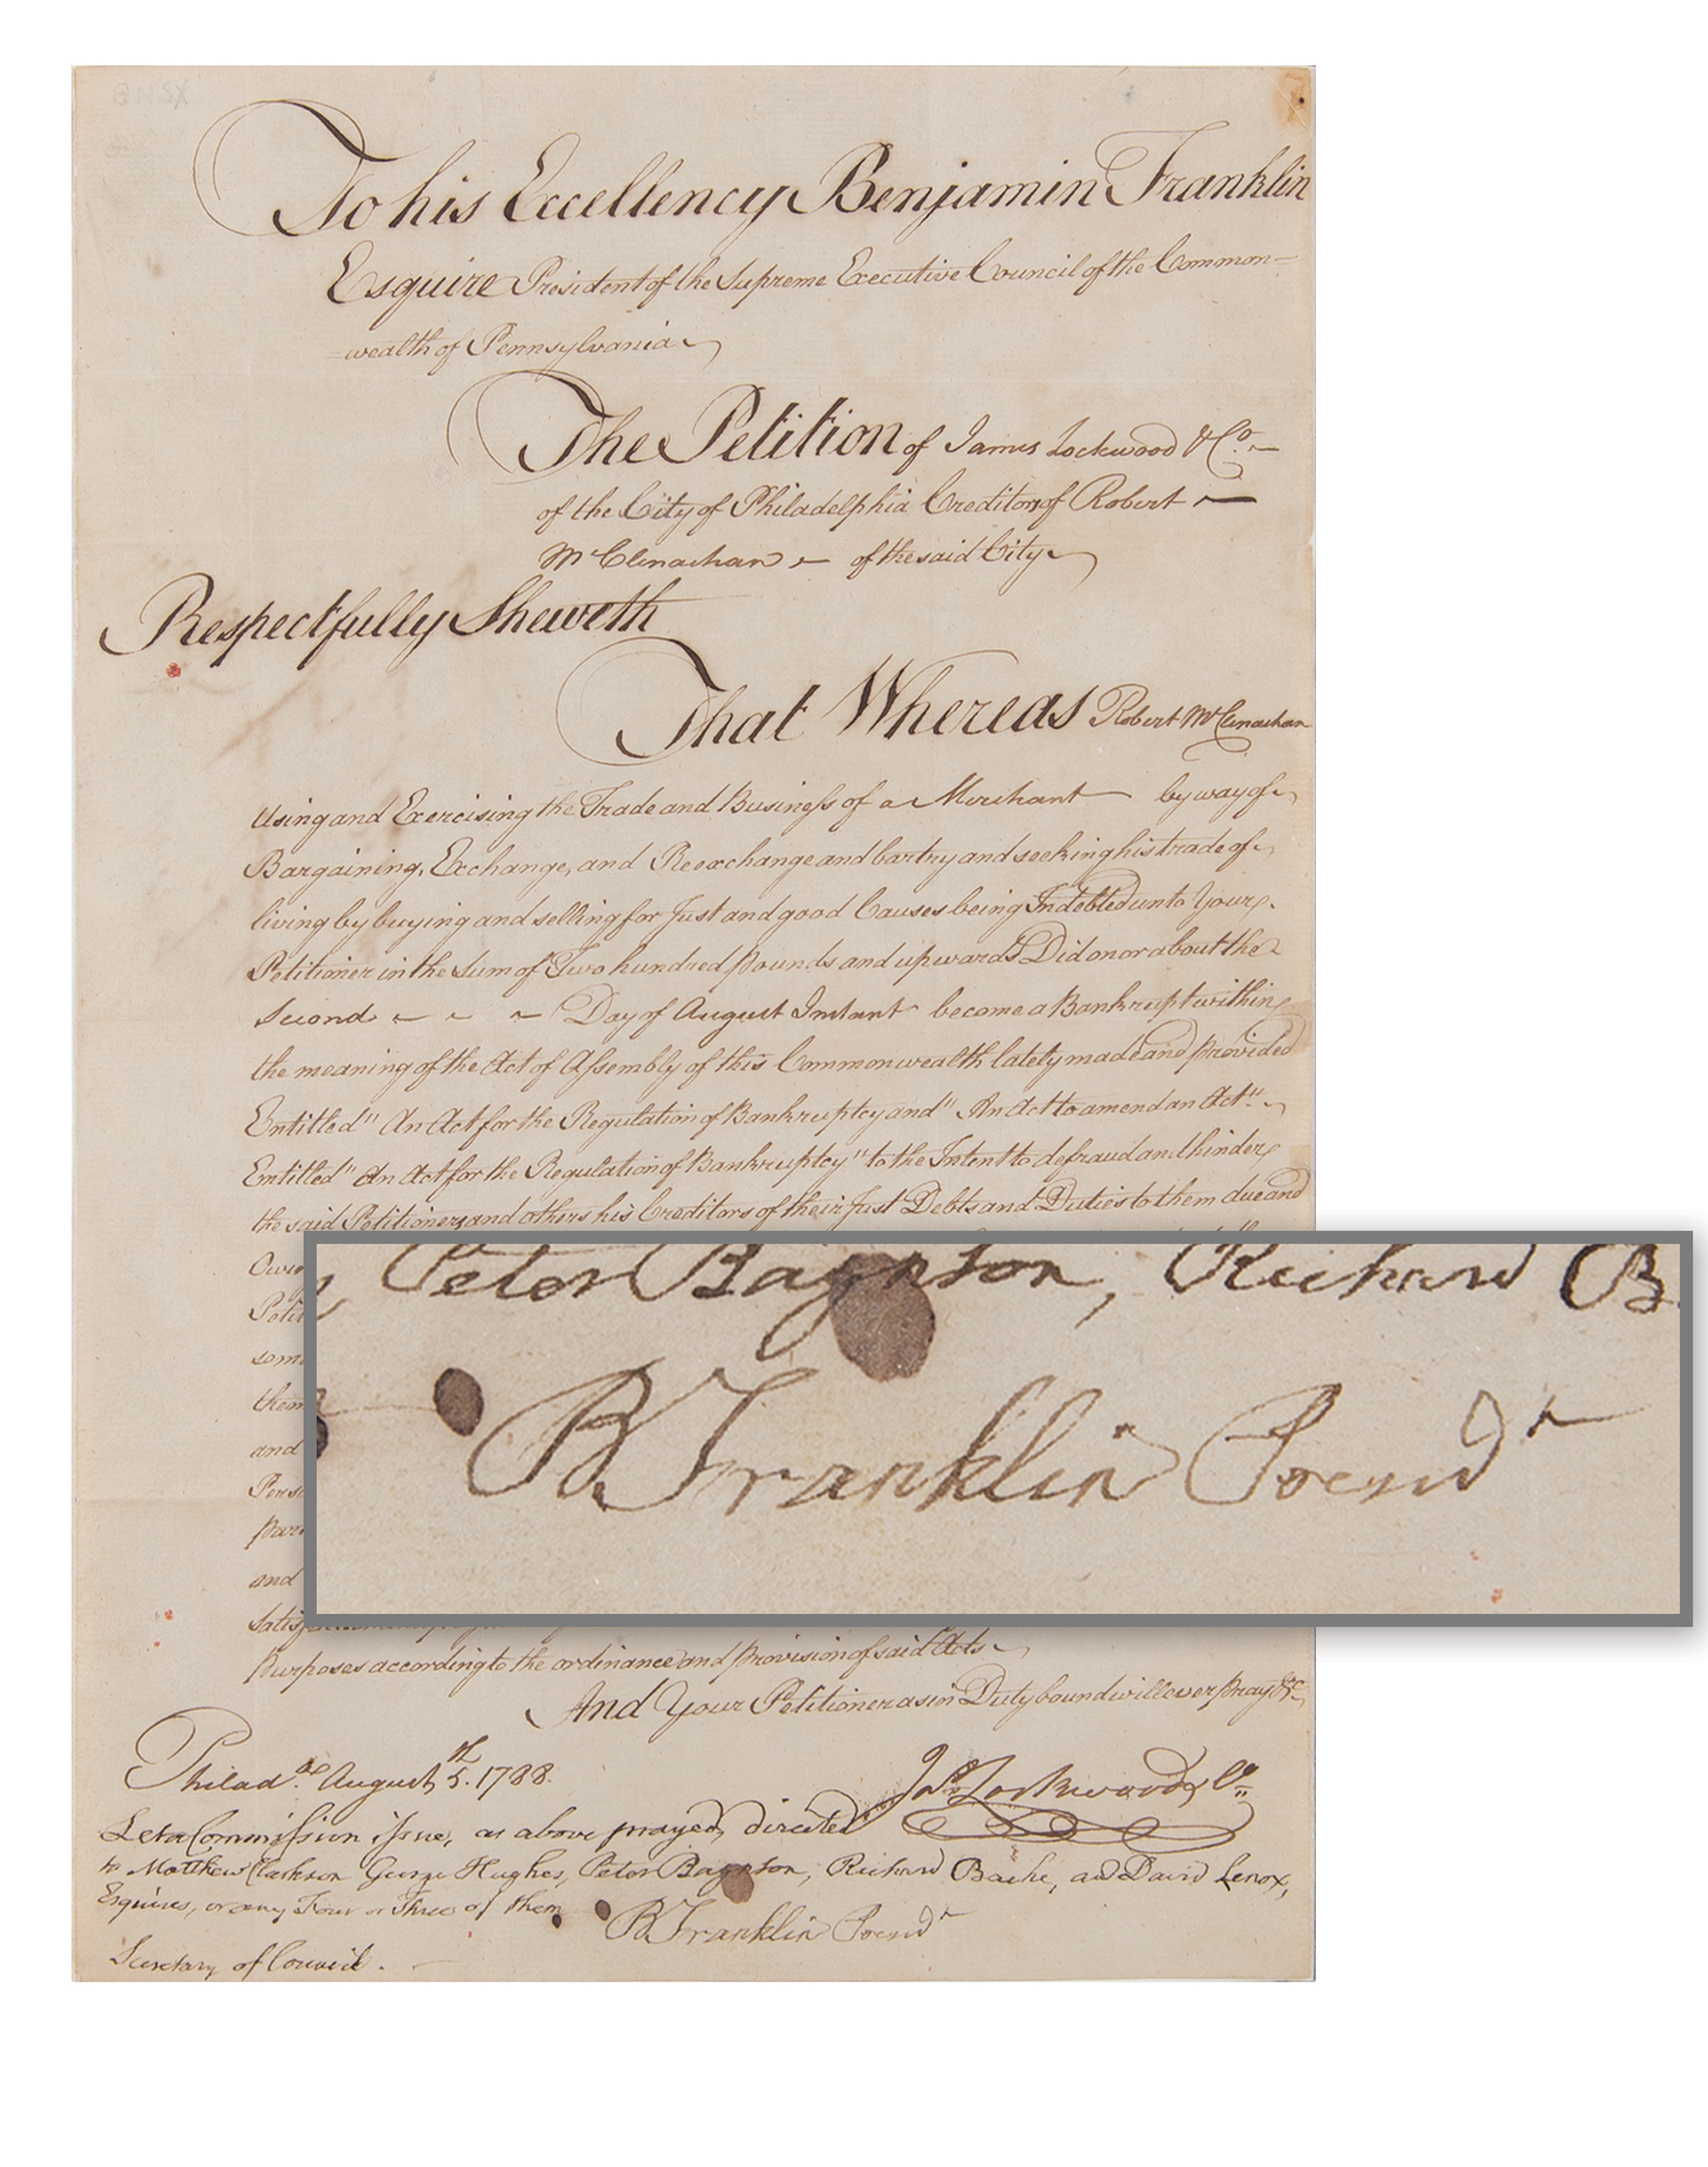 Lot #55 Benjamin Franklin Autograph Endorsement Signed as President of Pennsylvania - over 25 words in his own hand